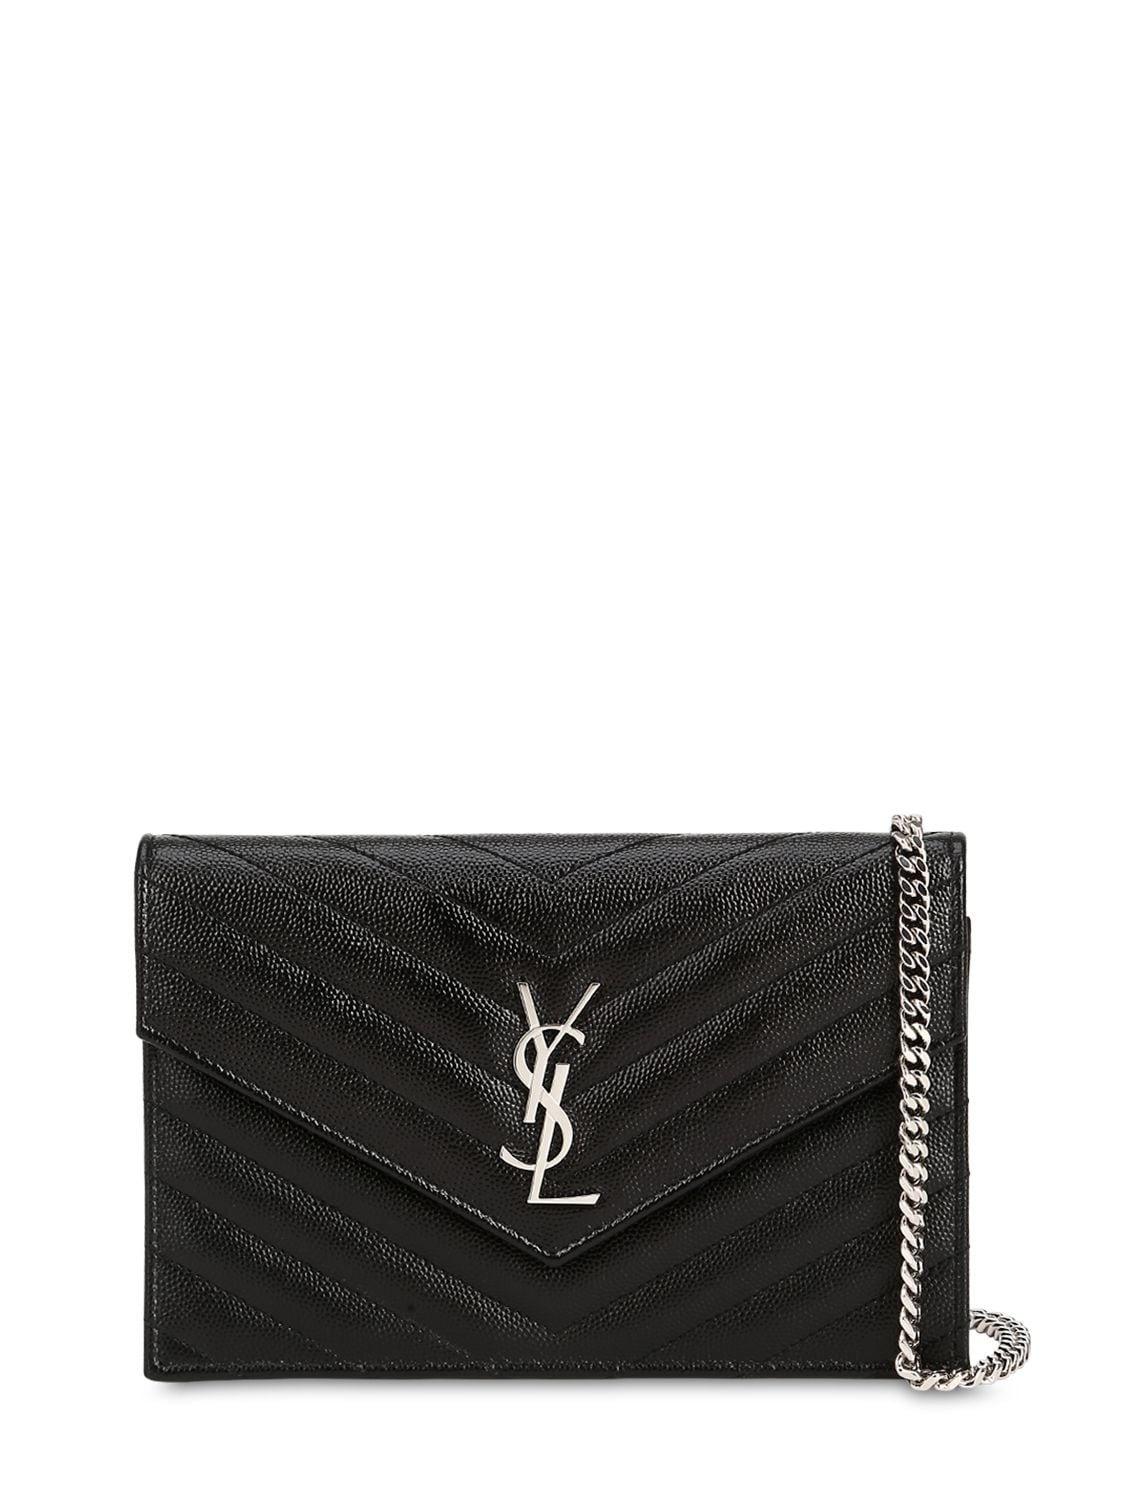 SAINT LAURENT SMALL QUILTED MONOGRAM LEATHER BAG,68IG1N002-MTAwMA2